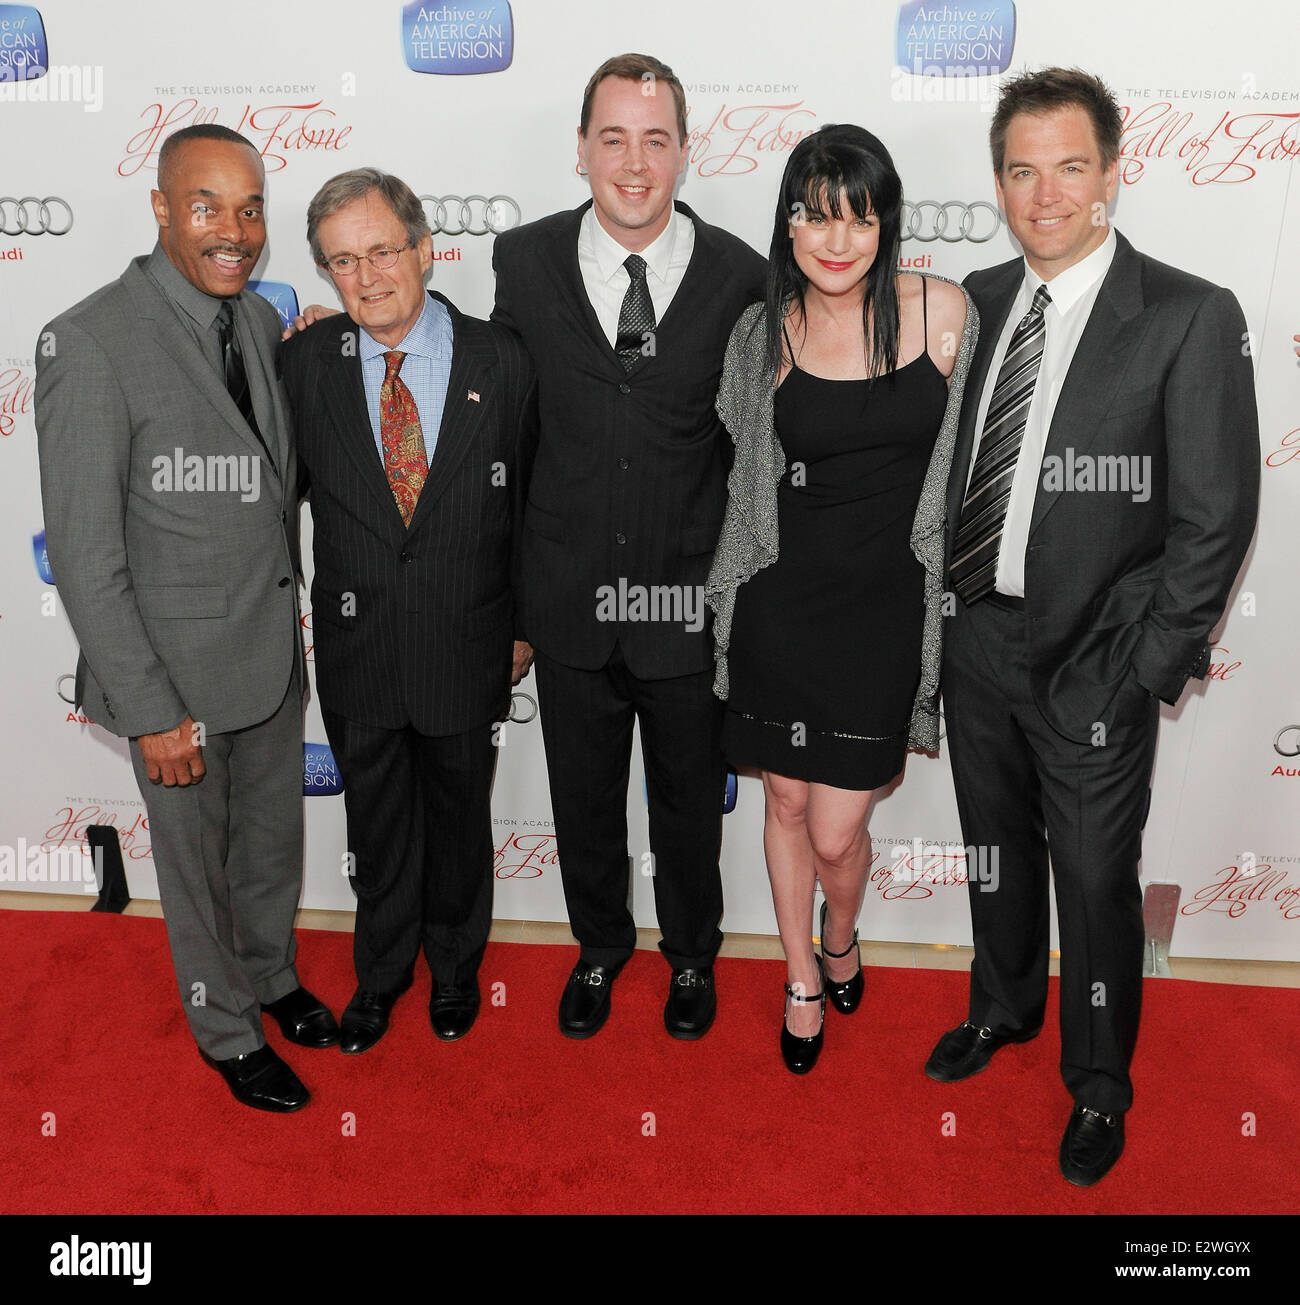 The Academy of Television Arts & Sciences' 22nd Annual Hall of Fame Induction Gala at The Beverly Hilton Hotel - Arrivals  Featuring: David McCallum,Sean Murray,Pauley Perrette,Michael Weatherly Where: Beverly Hills, California, United States When: 11 Mar 2013 Stock Photo